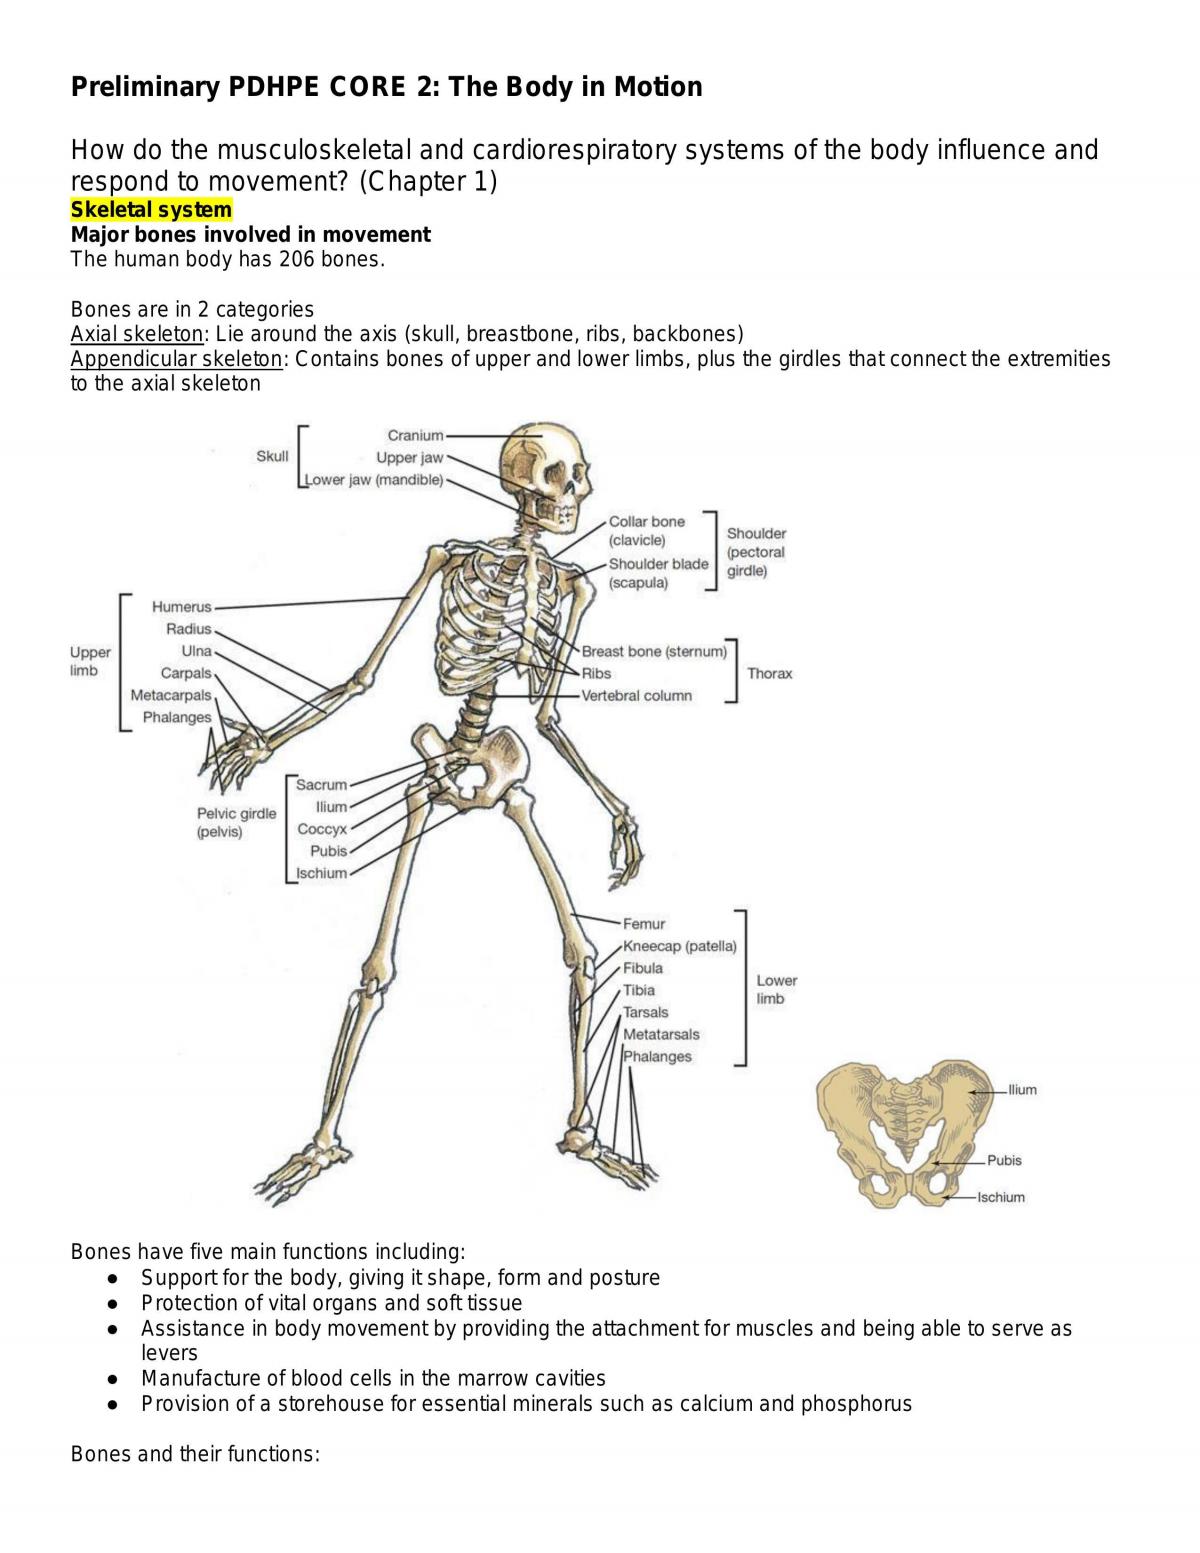 Preliminary PDHPE Core 2: The Body in Motion  - Page 1